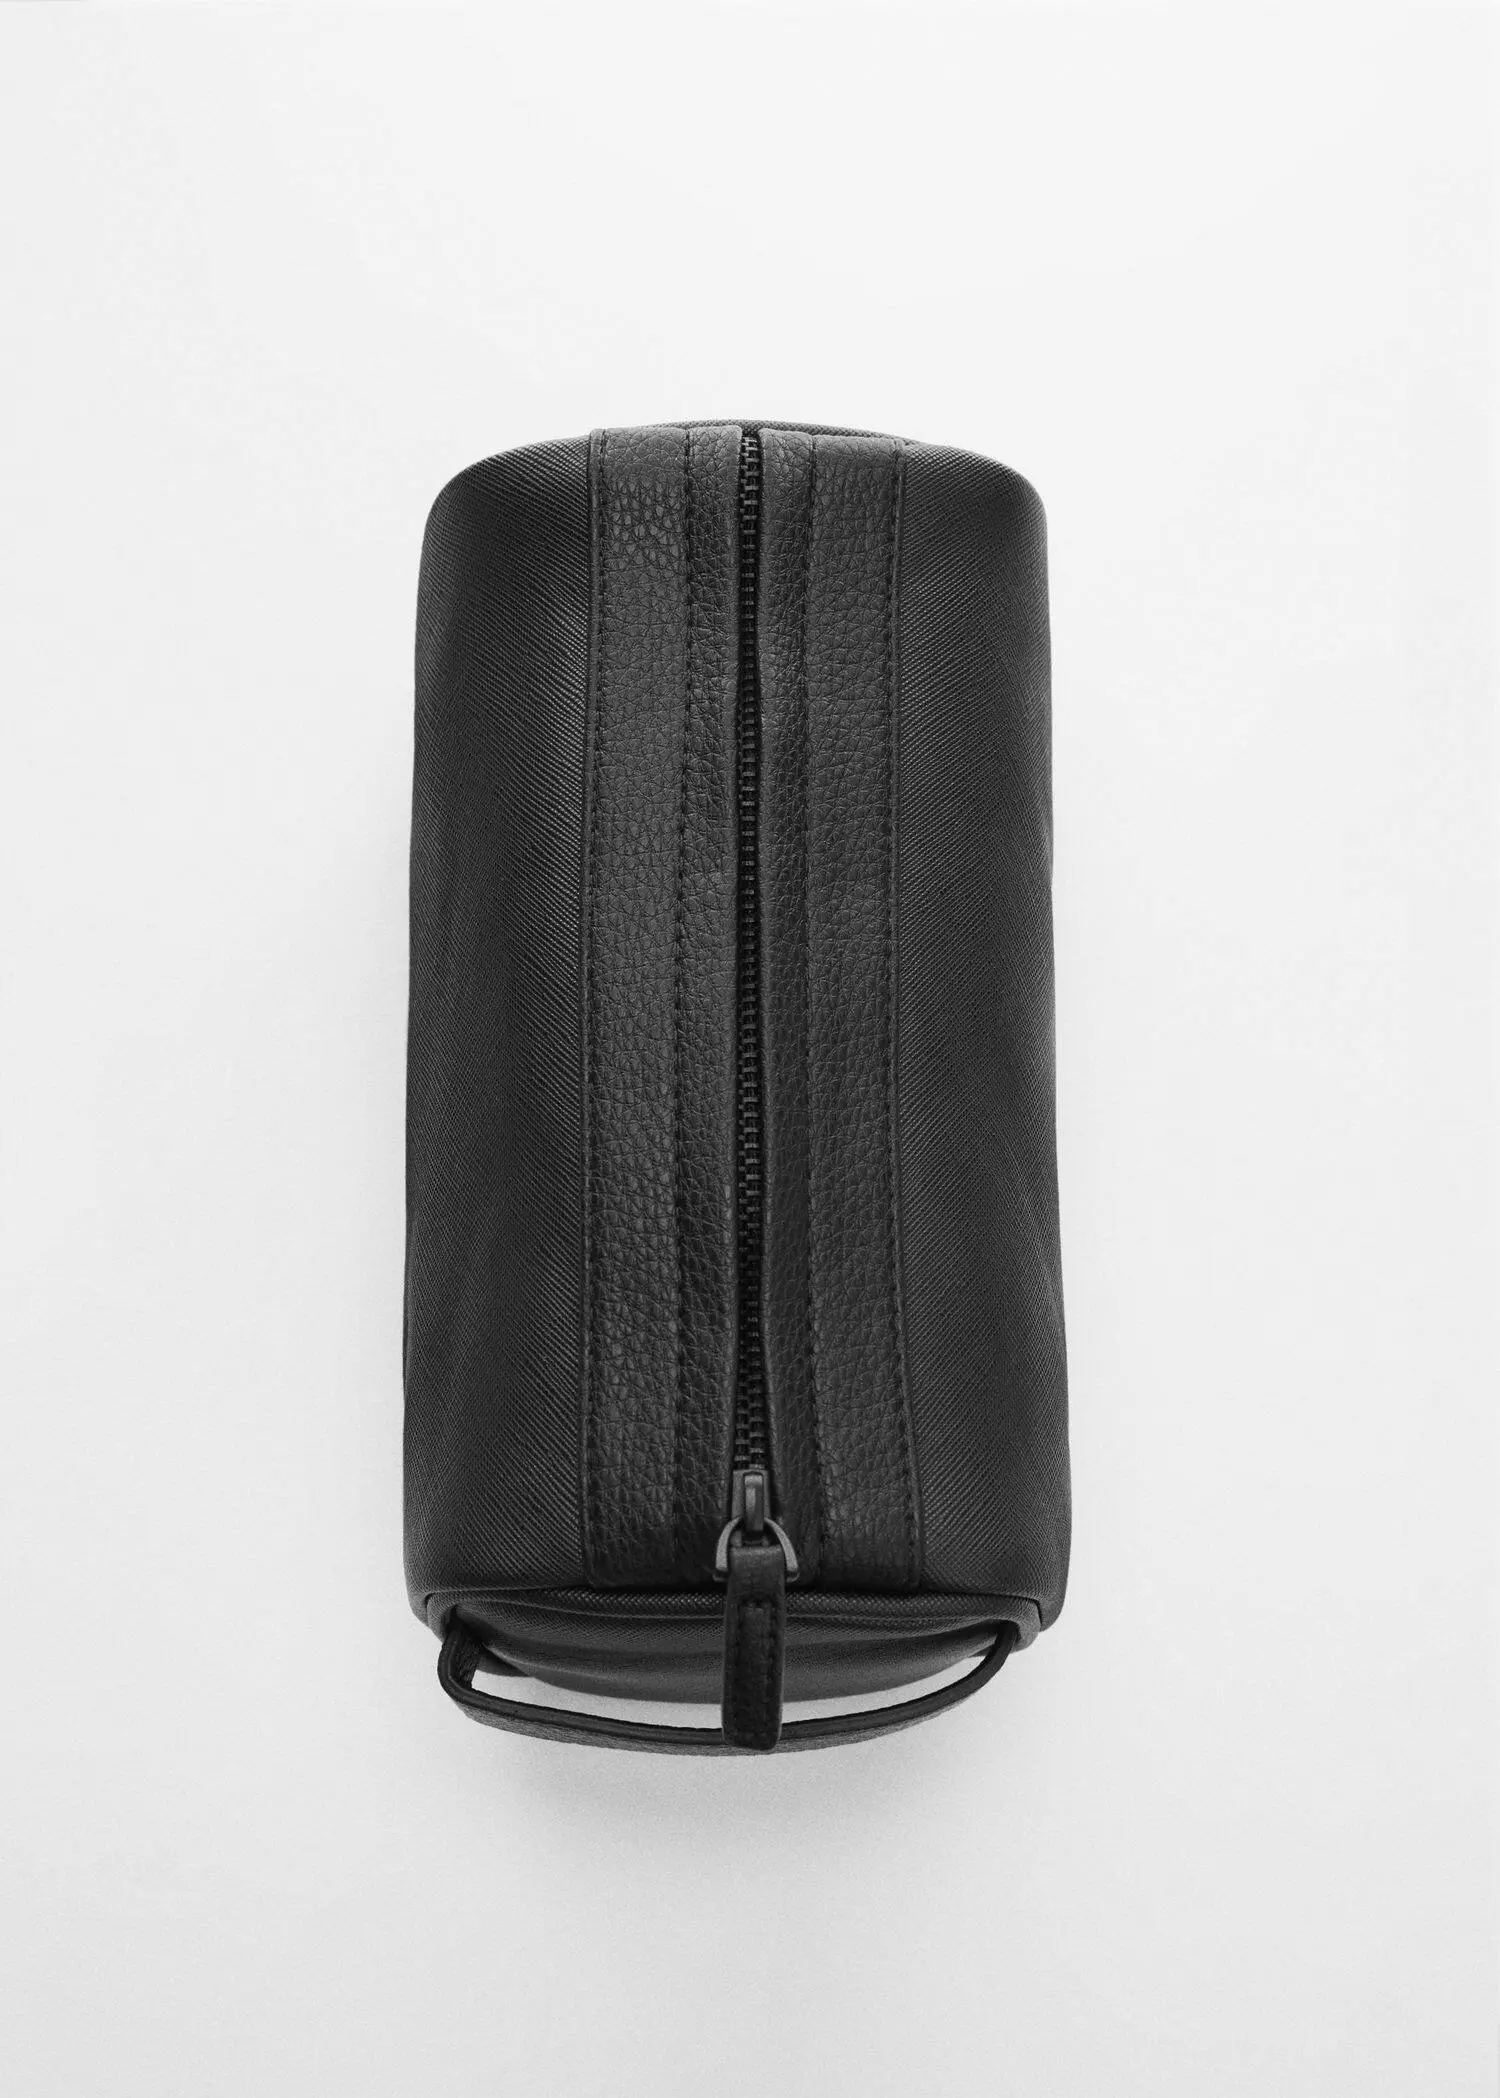 Mango Embossed leather-effect toiletry bag. 3